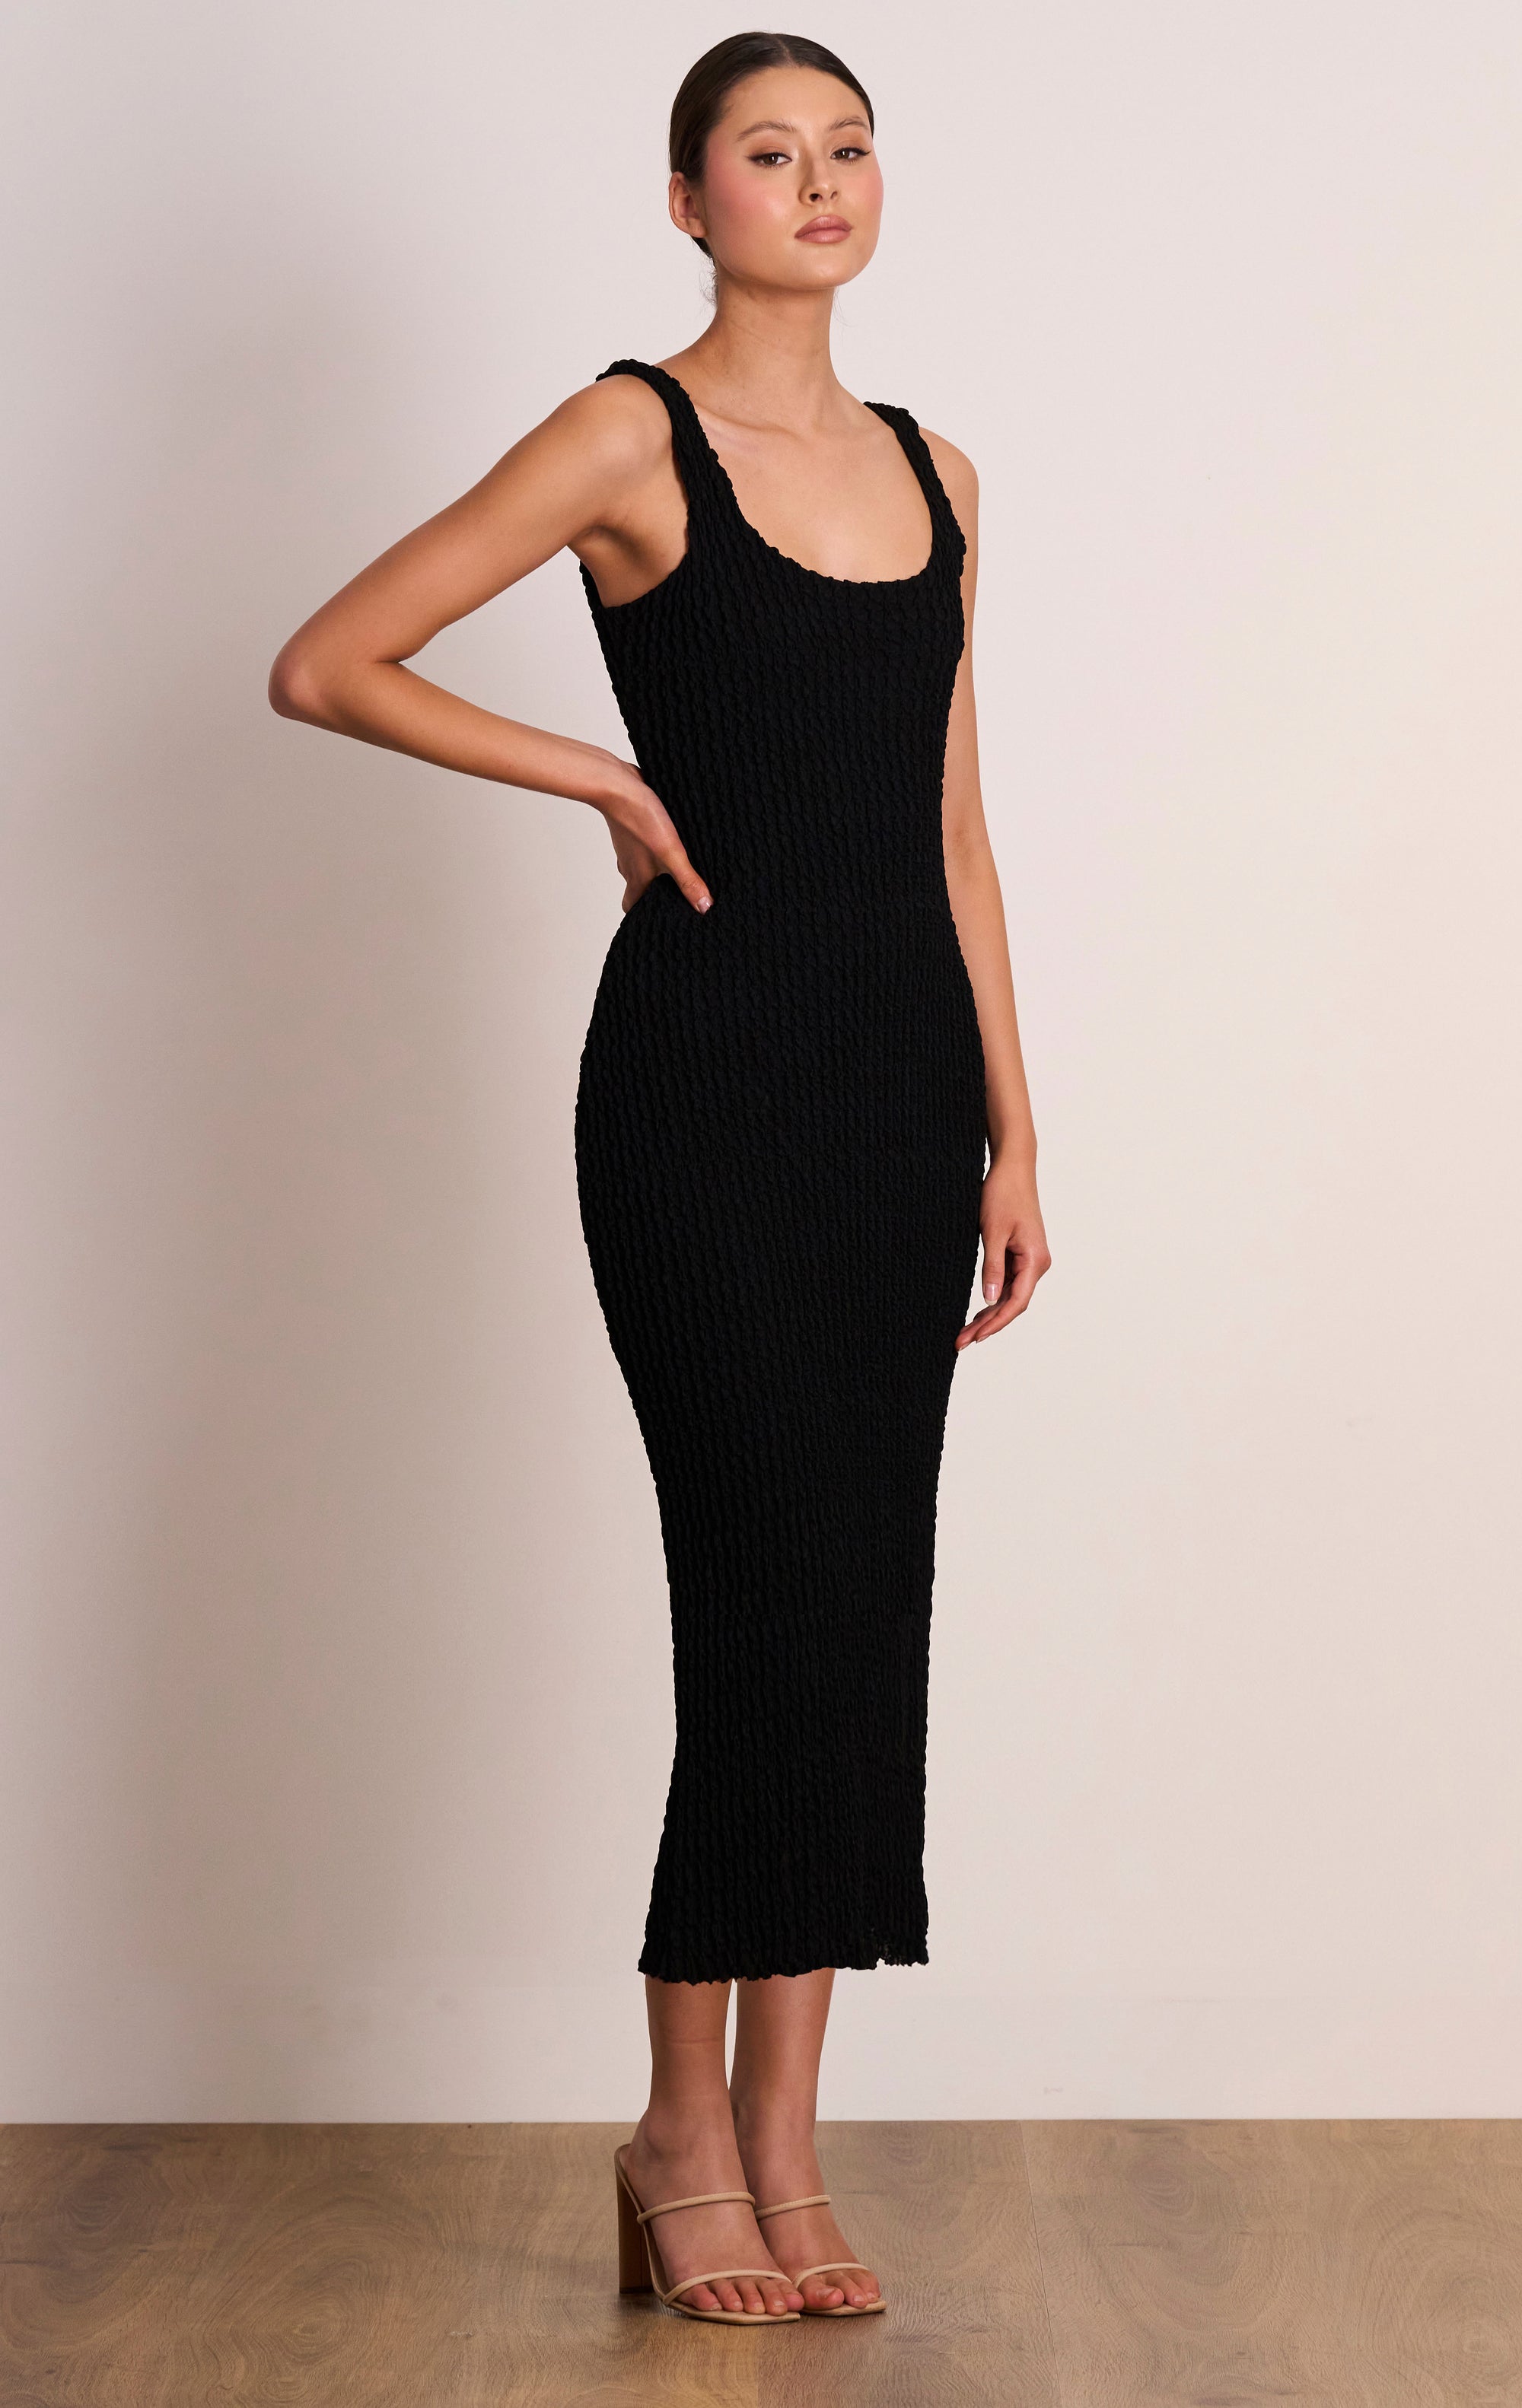 Spritz Midi - TAKE 40% OFF DISCOUNT APPLIED AT CHECKOUT